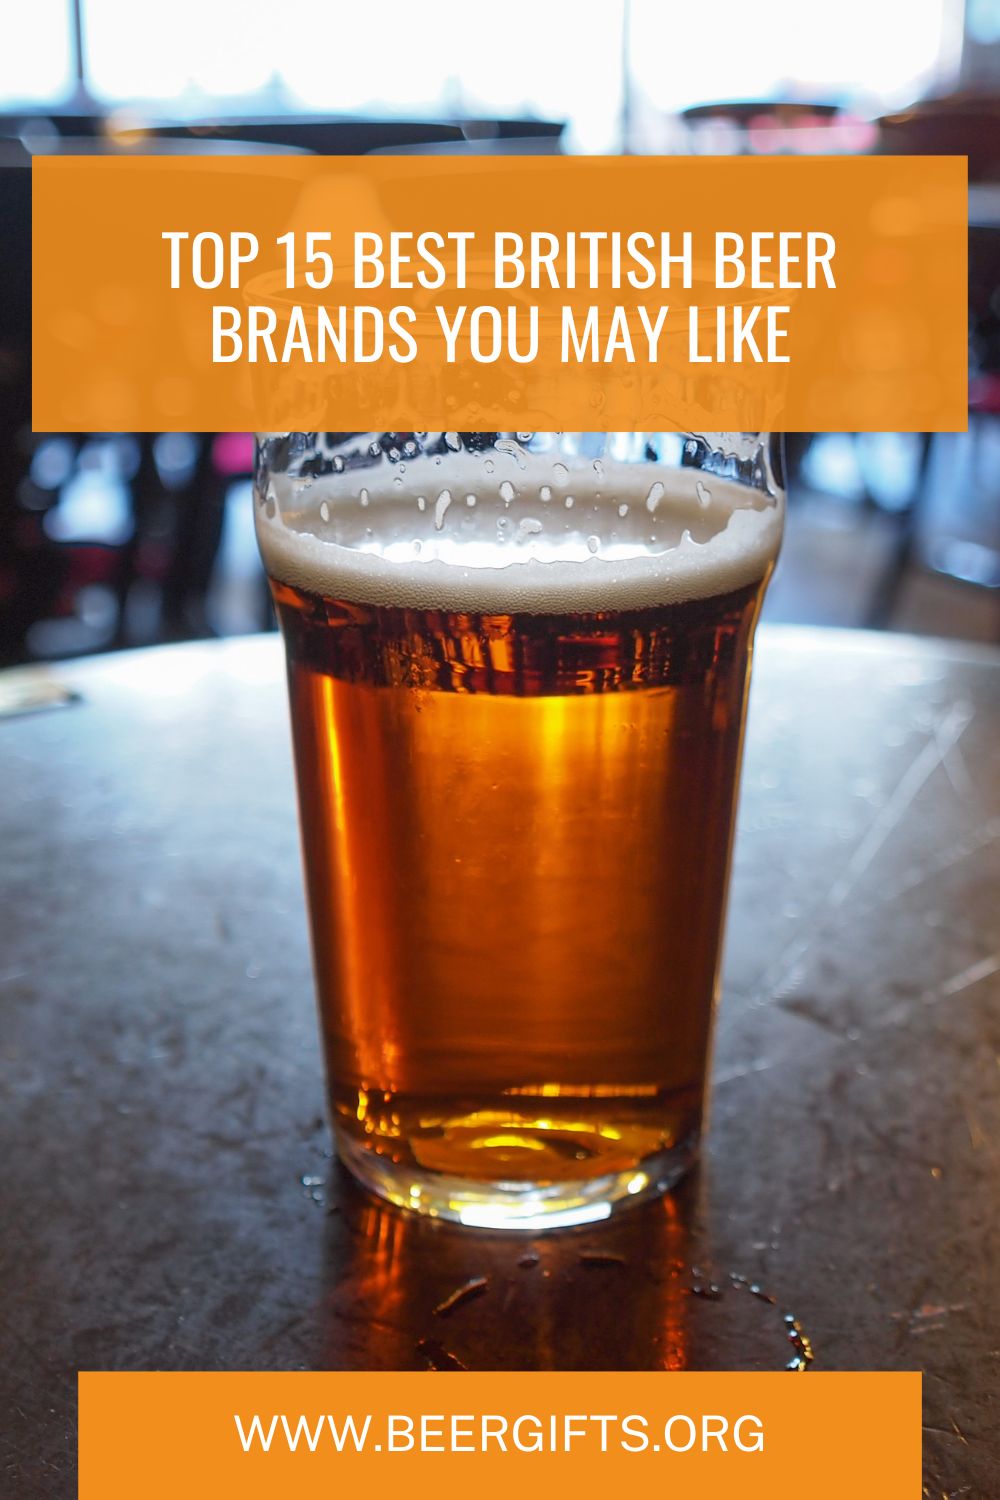 Top 15 Best British Beer Brands You May Like1